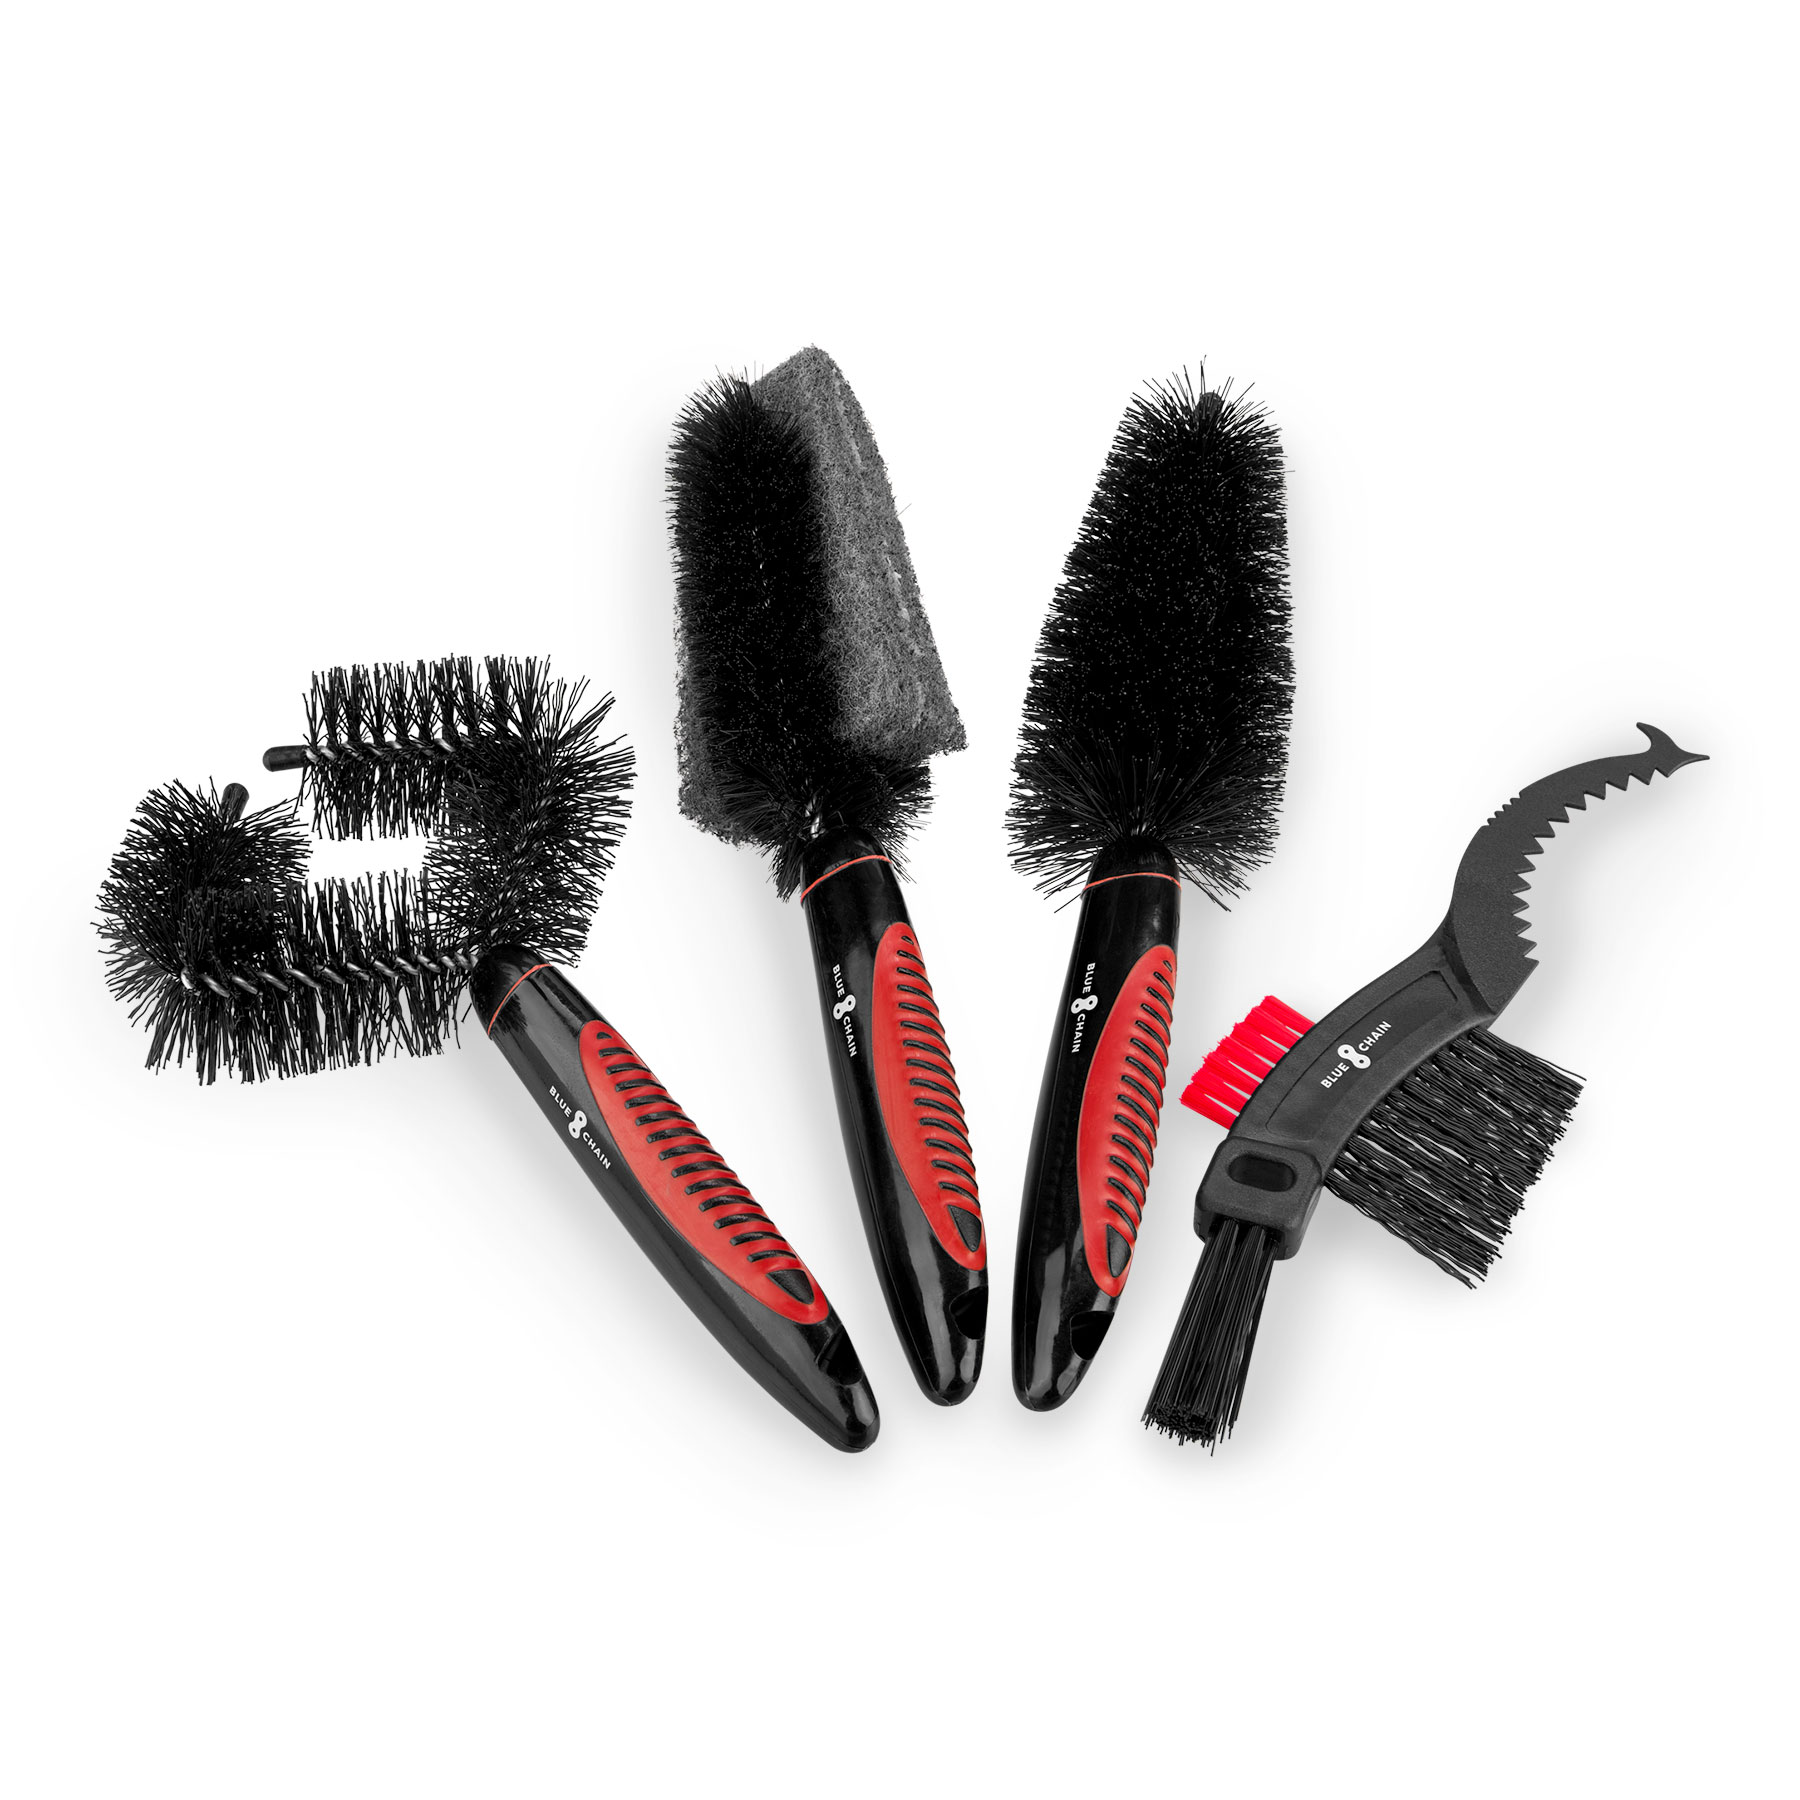 Picture of BLUECHAIN Bikecleaning Brush Set - 4 Piece